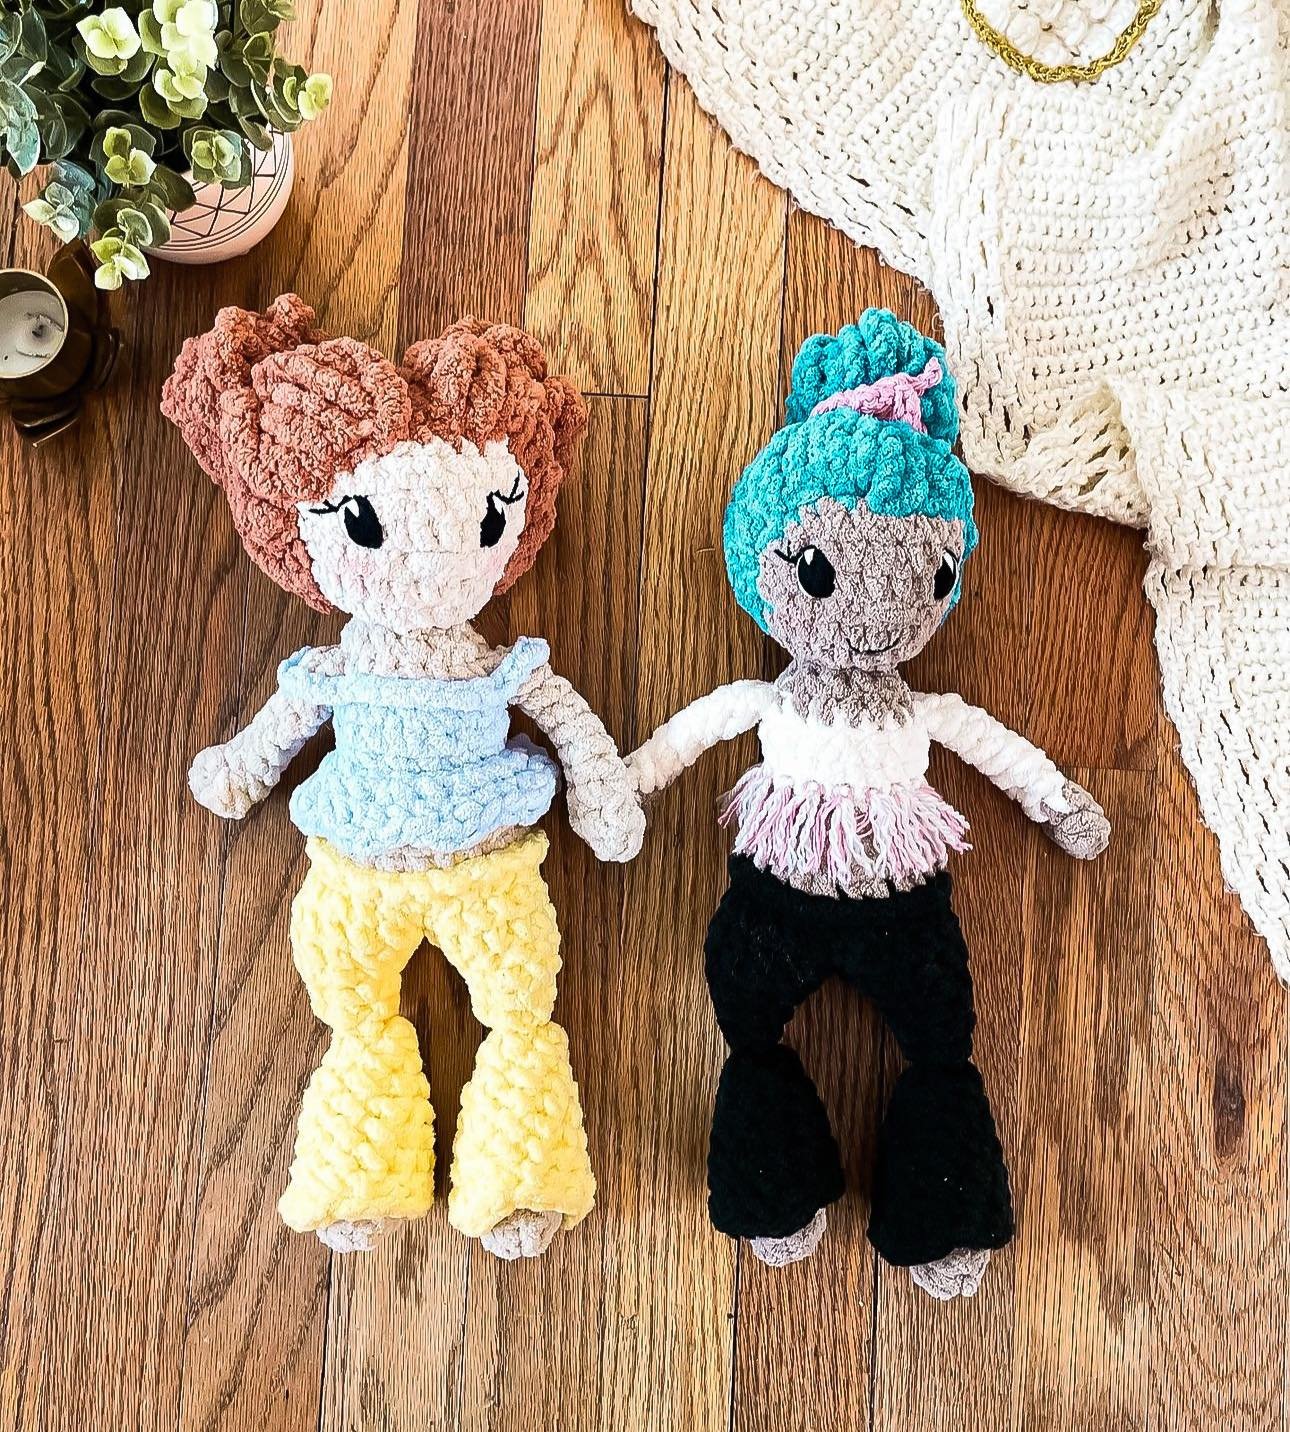 Kids loves these cool dolls! Be sure to show the little ones this Saturday when shopping local🛒🥳
&bull;
#westsidemarketcincy #westside #westwoodcincinnati #westsidemarketcincy #supportsmallbusiness